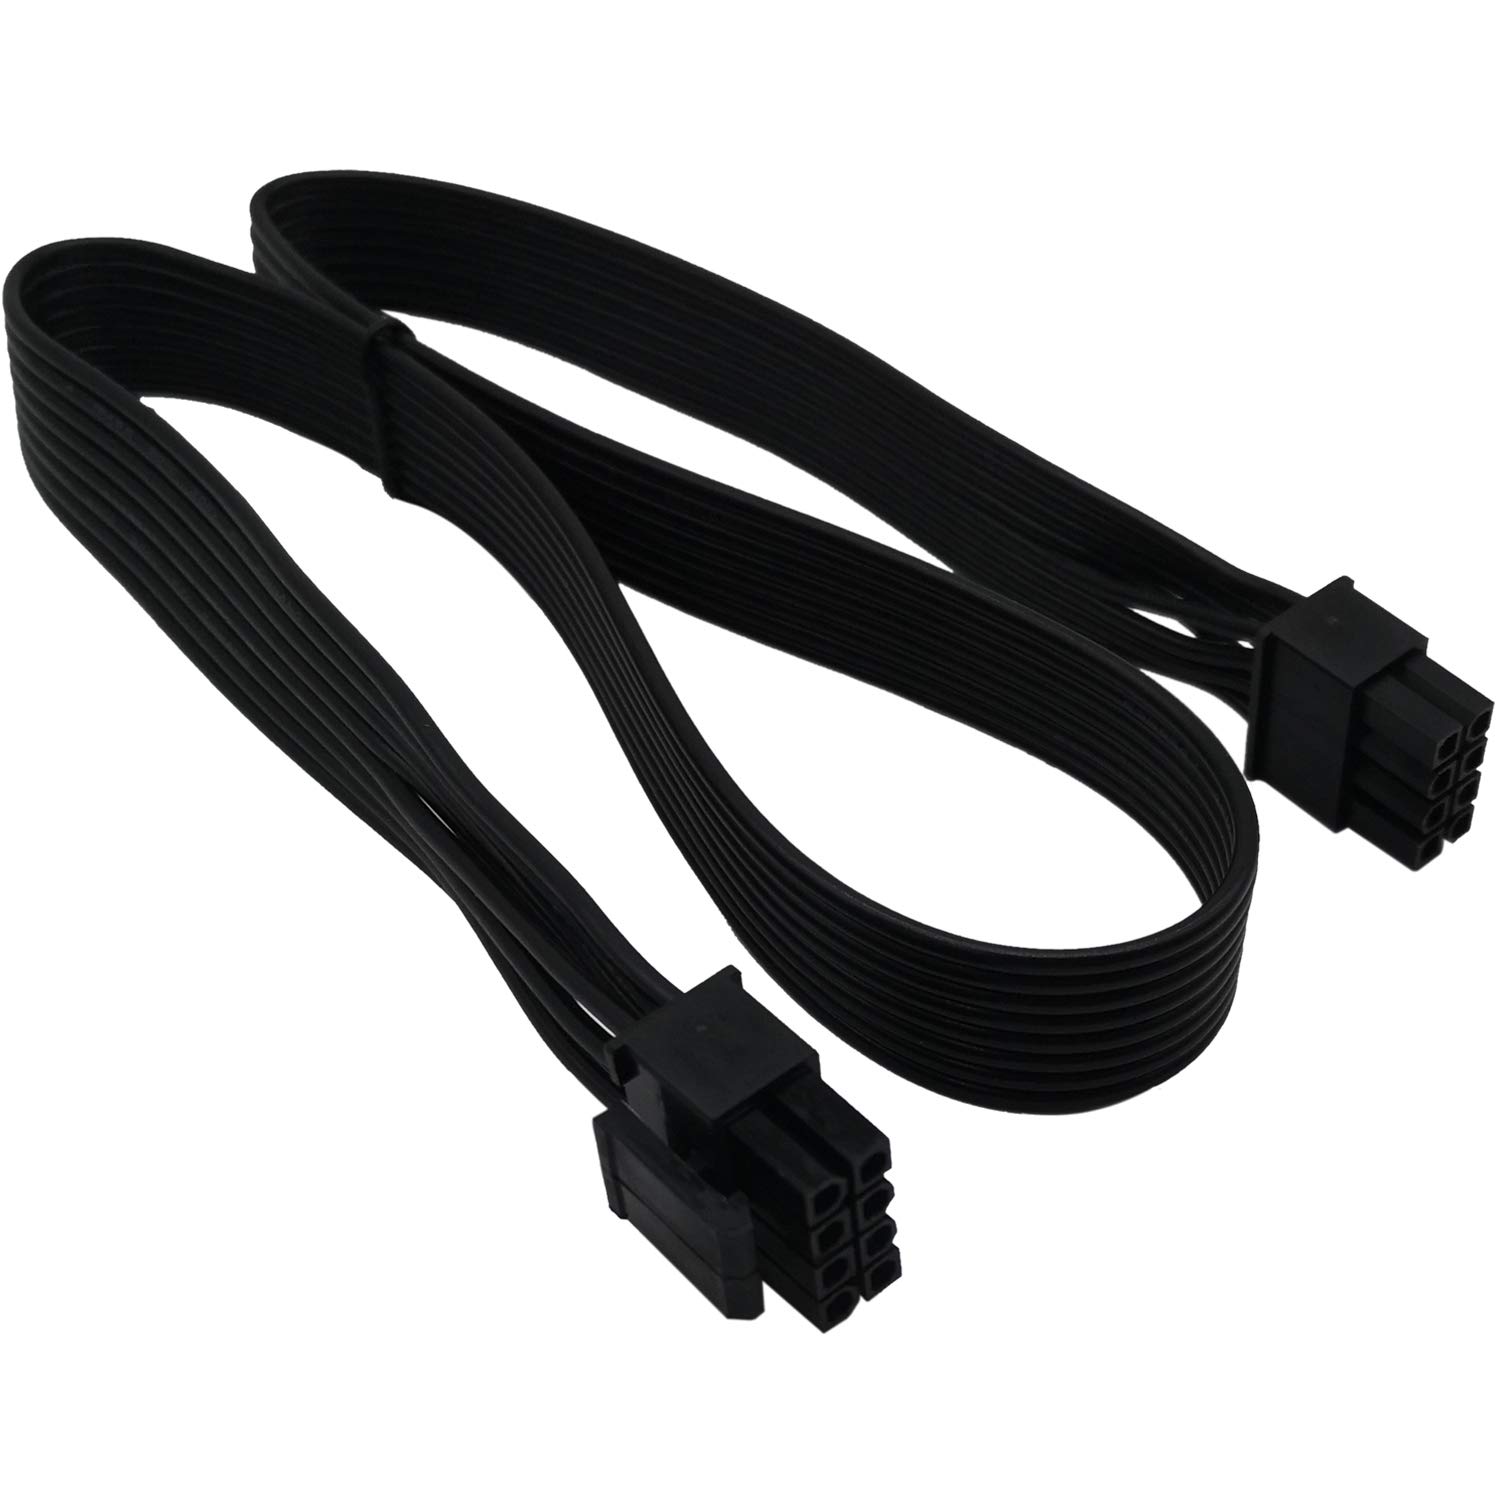 US$ 7.20 - COMeap CPU 8 Pin Male to CPU 8 Pin (4+4 Detachable) Male EPS-12V  Motherboard Power Adapter Cable for Corsair Modular Power Supply  25-inch(63cm) - m.comeap.com